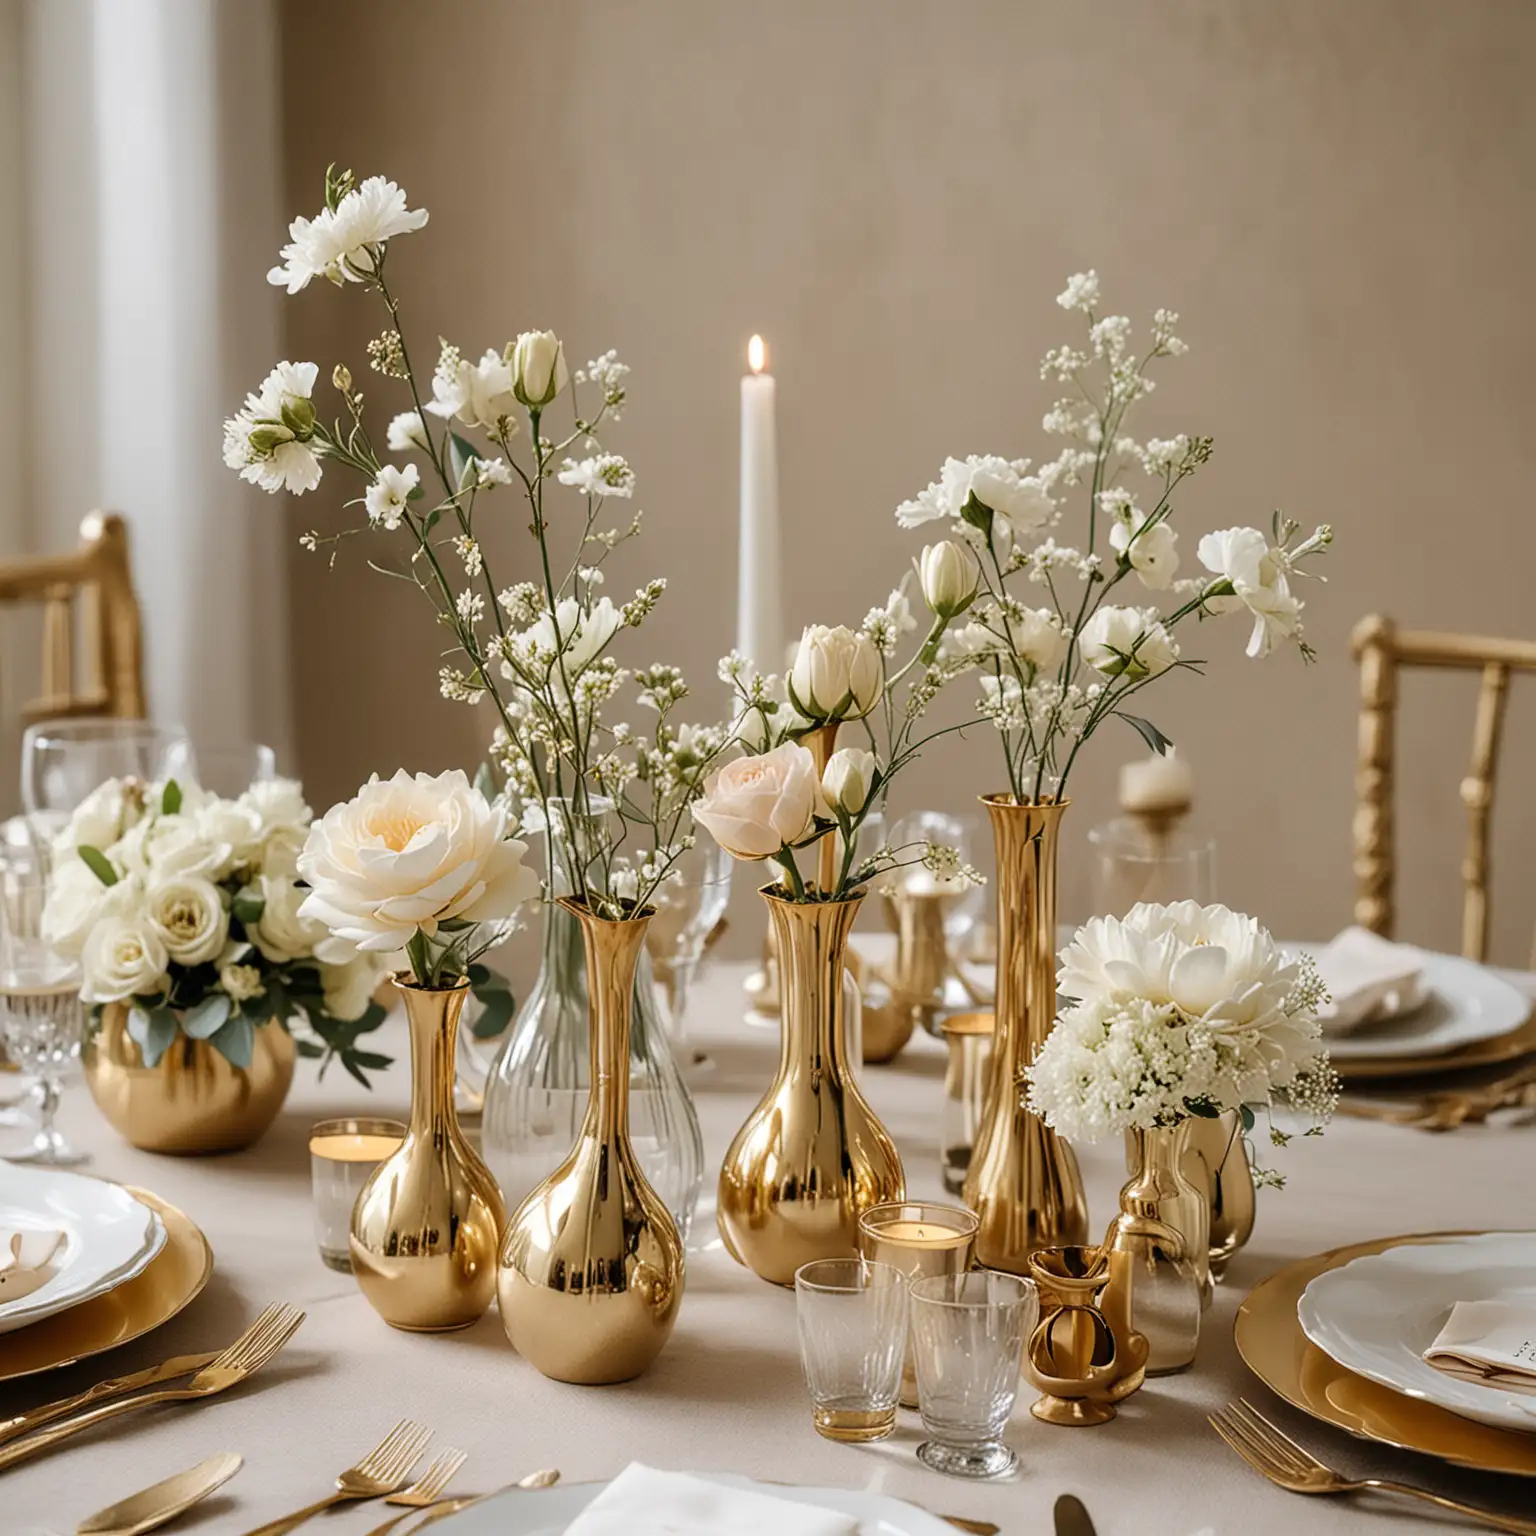 an elegant wedding centerpiece that includes gold bud vases of different heights set up in a cohesive arrangement for a centerpiece